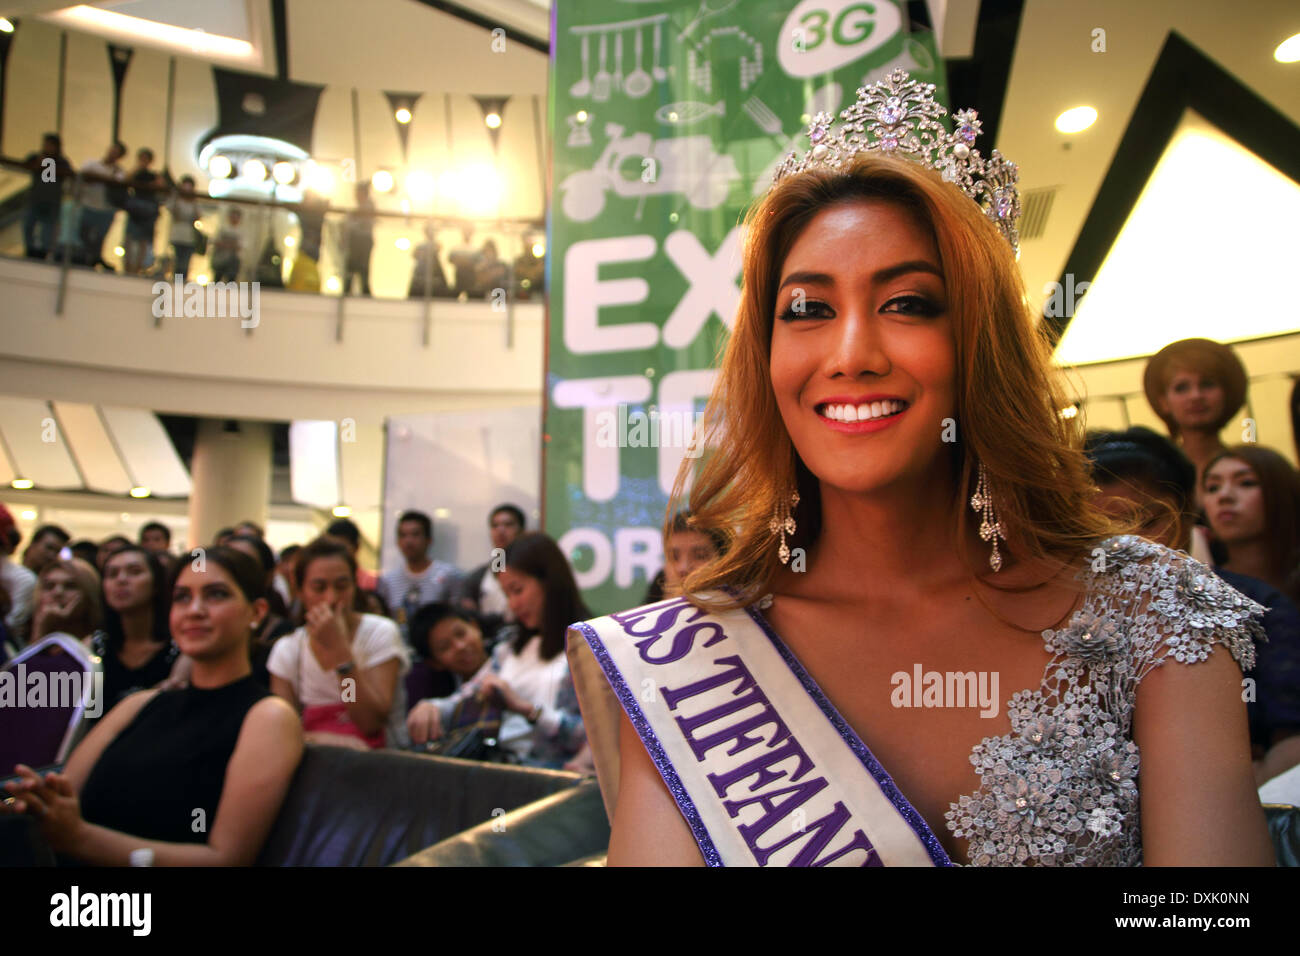 Bangkok, Thailand. 26th Mar, 2014.  Winner of the Miss Tiffany Universe contest in 2013, Nethnapada Kanrayanon during qualification for the transvestite and transgender beauty pageant Miss Tiffany Universe 2014. About 70 candidates registered for the contest. The Miss Tiffany Universe contest has been running for 16 years, with all of the transsexual or transvestite contestants aiming to promote human rights for the transgender population in Thailand. Credit:  Sanji Dee/Alamy Live News Stock Photo